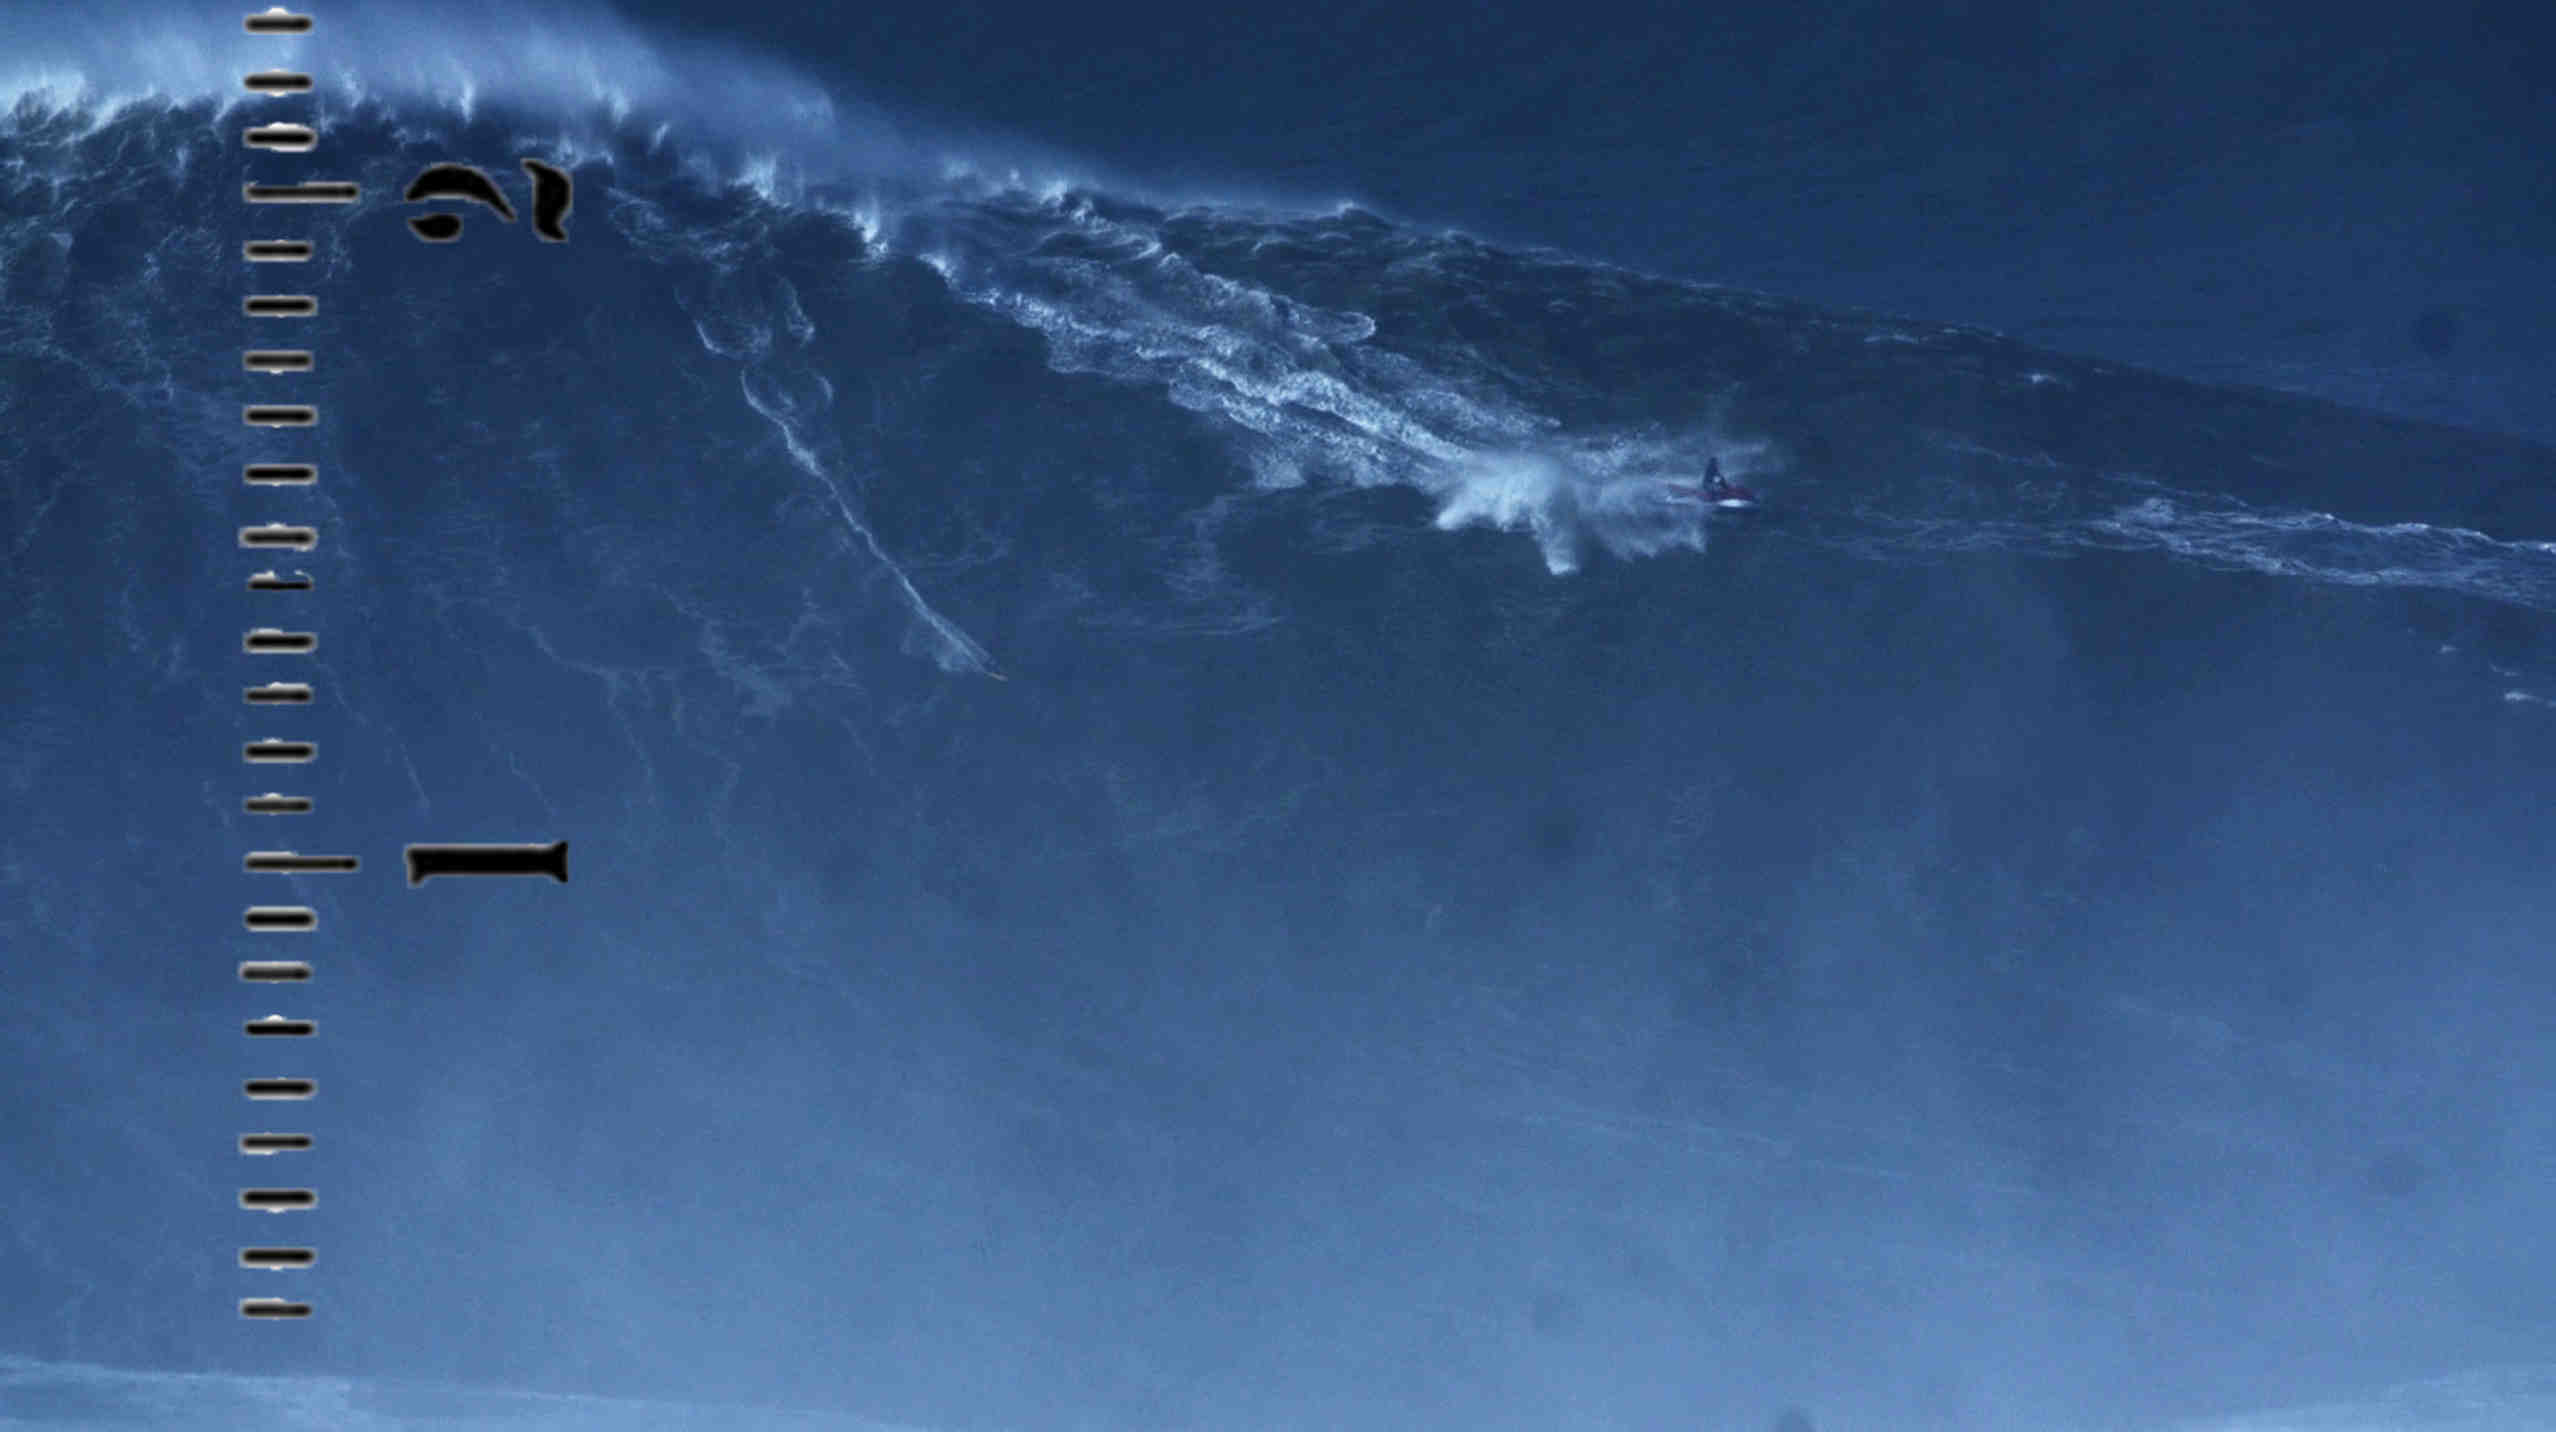 Who surfed the biggest wave?